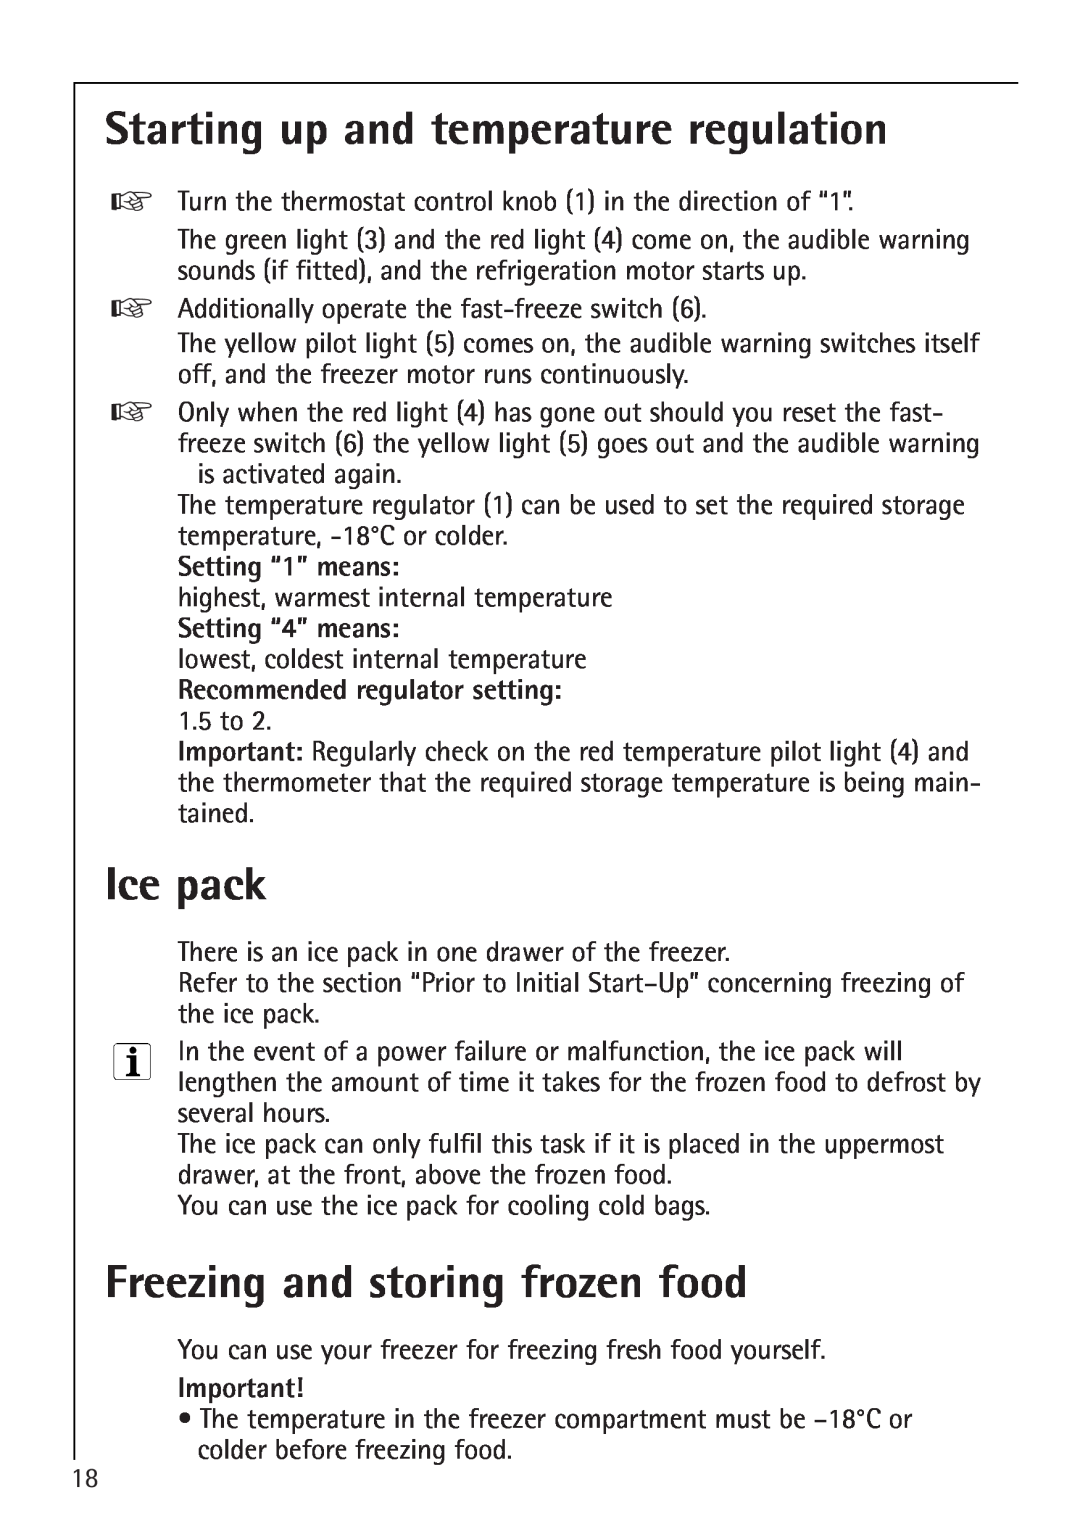 Electrolux 1254-6 iU Starting up and temperature regulation, Ice pack, Freezing and storing frozen food, Setting “1” means 